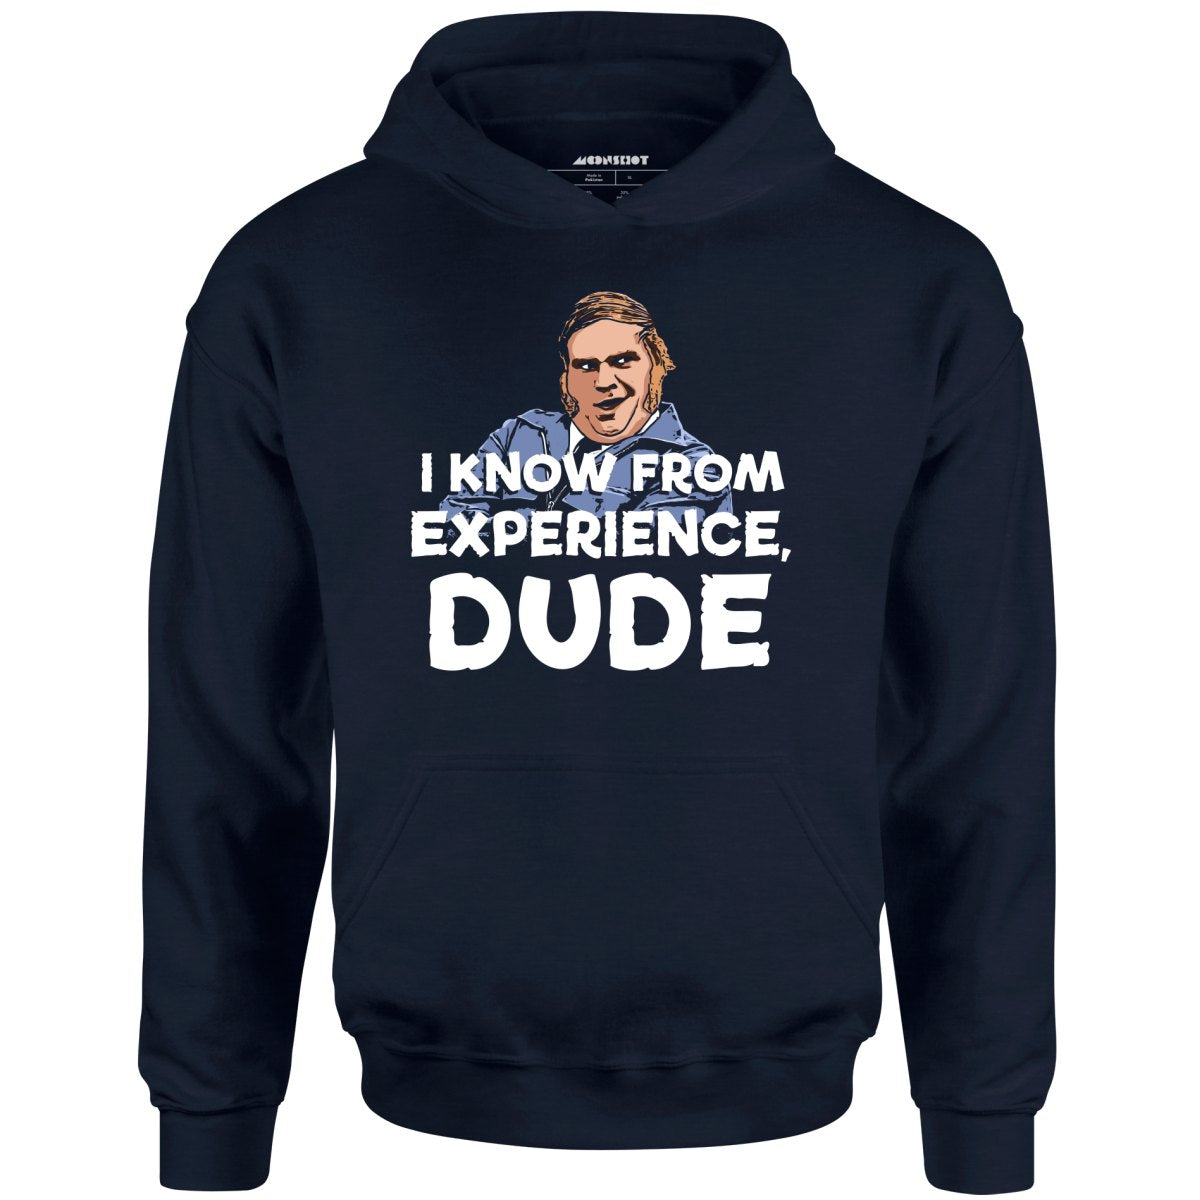 I Know From Experience, Dude - Unisex Hoodie